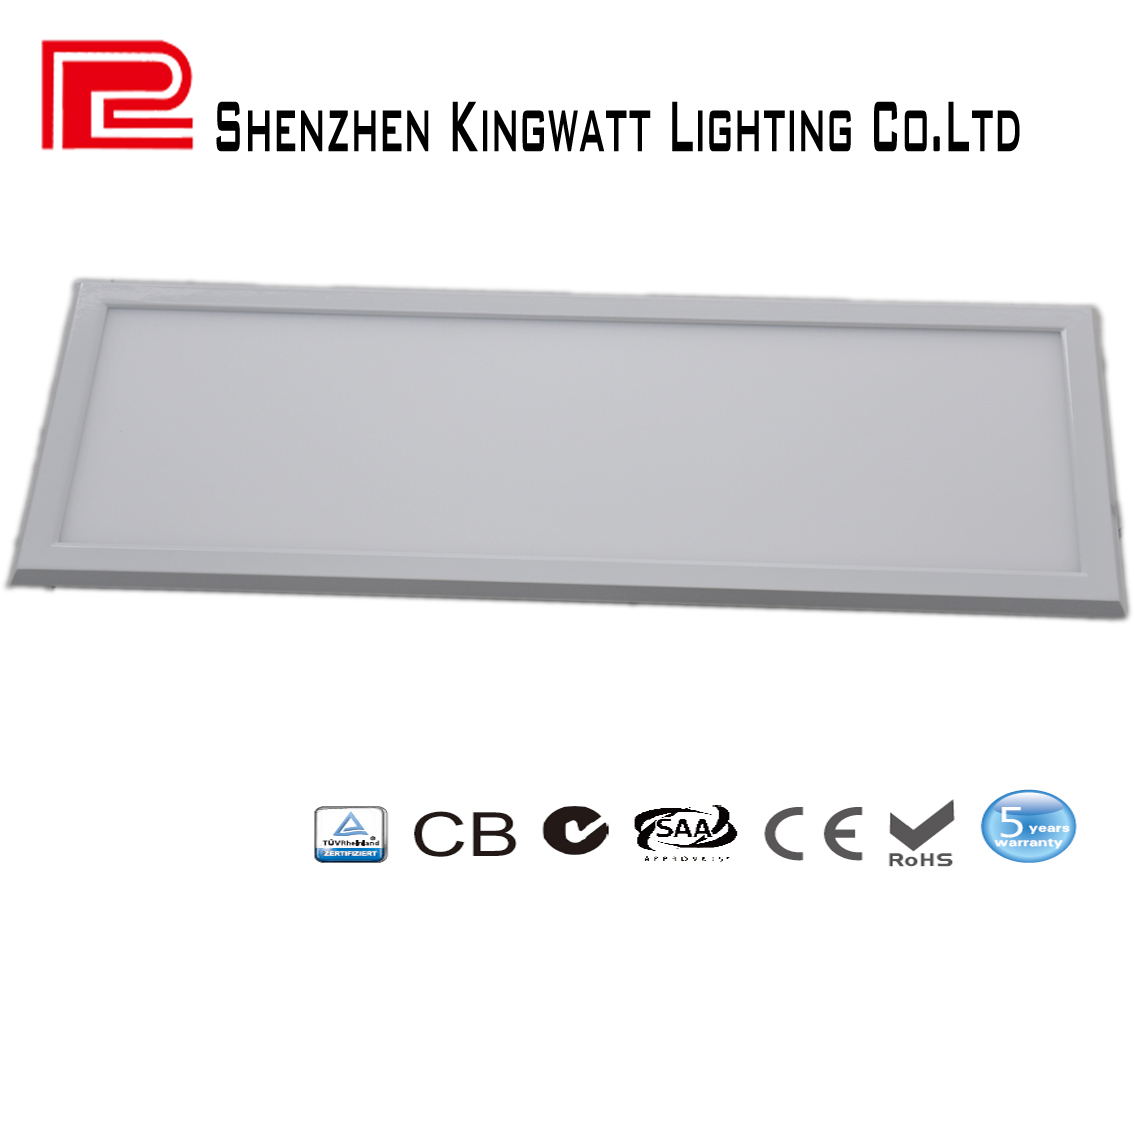 CE/RoHS 85Lm/W Magnetic suction LED panel light 300x300mm,16W